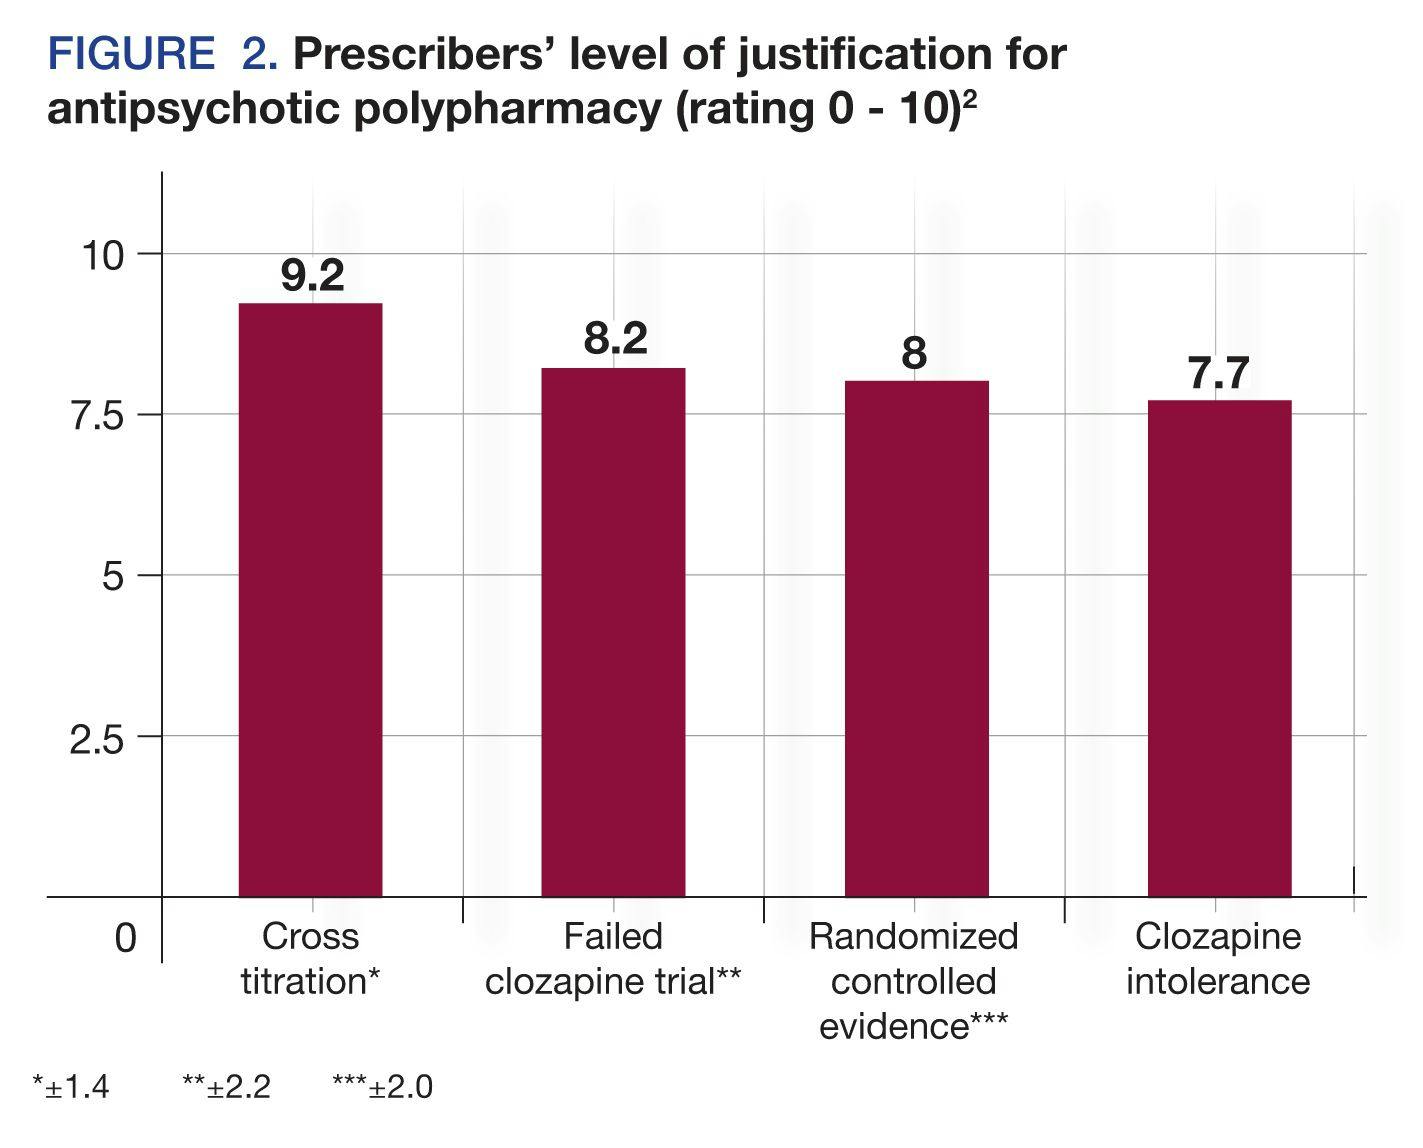 Prescribers’ level of justification for antipsychotic polypharmacy (rating 0 - 10)